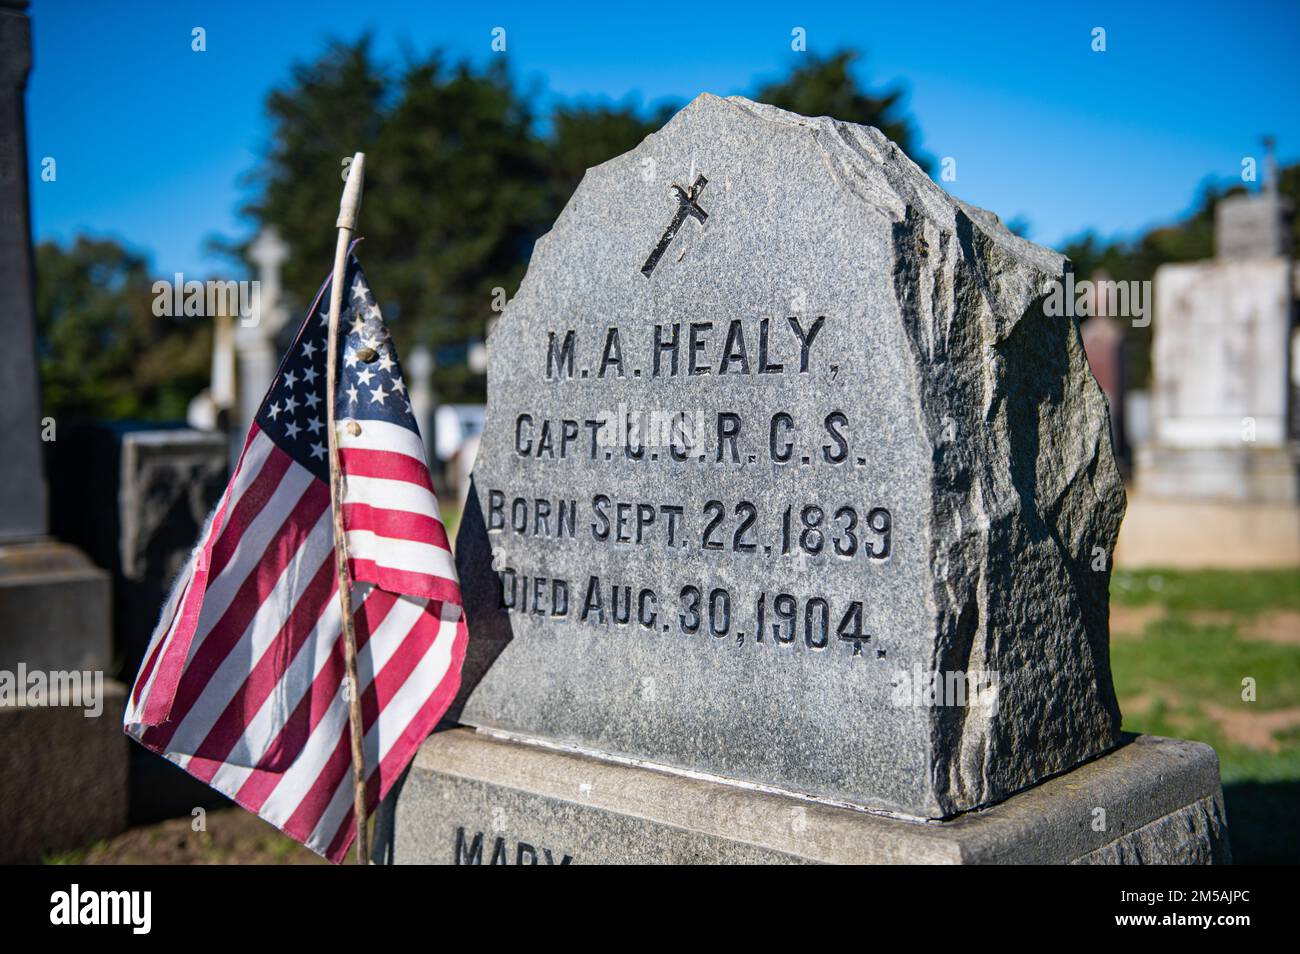 U.S. Revenue Cutter Service Capt. Micheal A. Healy’s headstone as shown at the Holy Cross Cemetery in Colma, Calif., Feb. 16, 2022. In 1864 Healy applied for a commission in the U.S. Revenue Marine and was accepted as a Third Lieutenant, his commission being signed by President Abraham Lincoln. Stock Photo